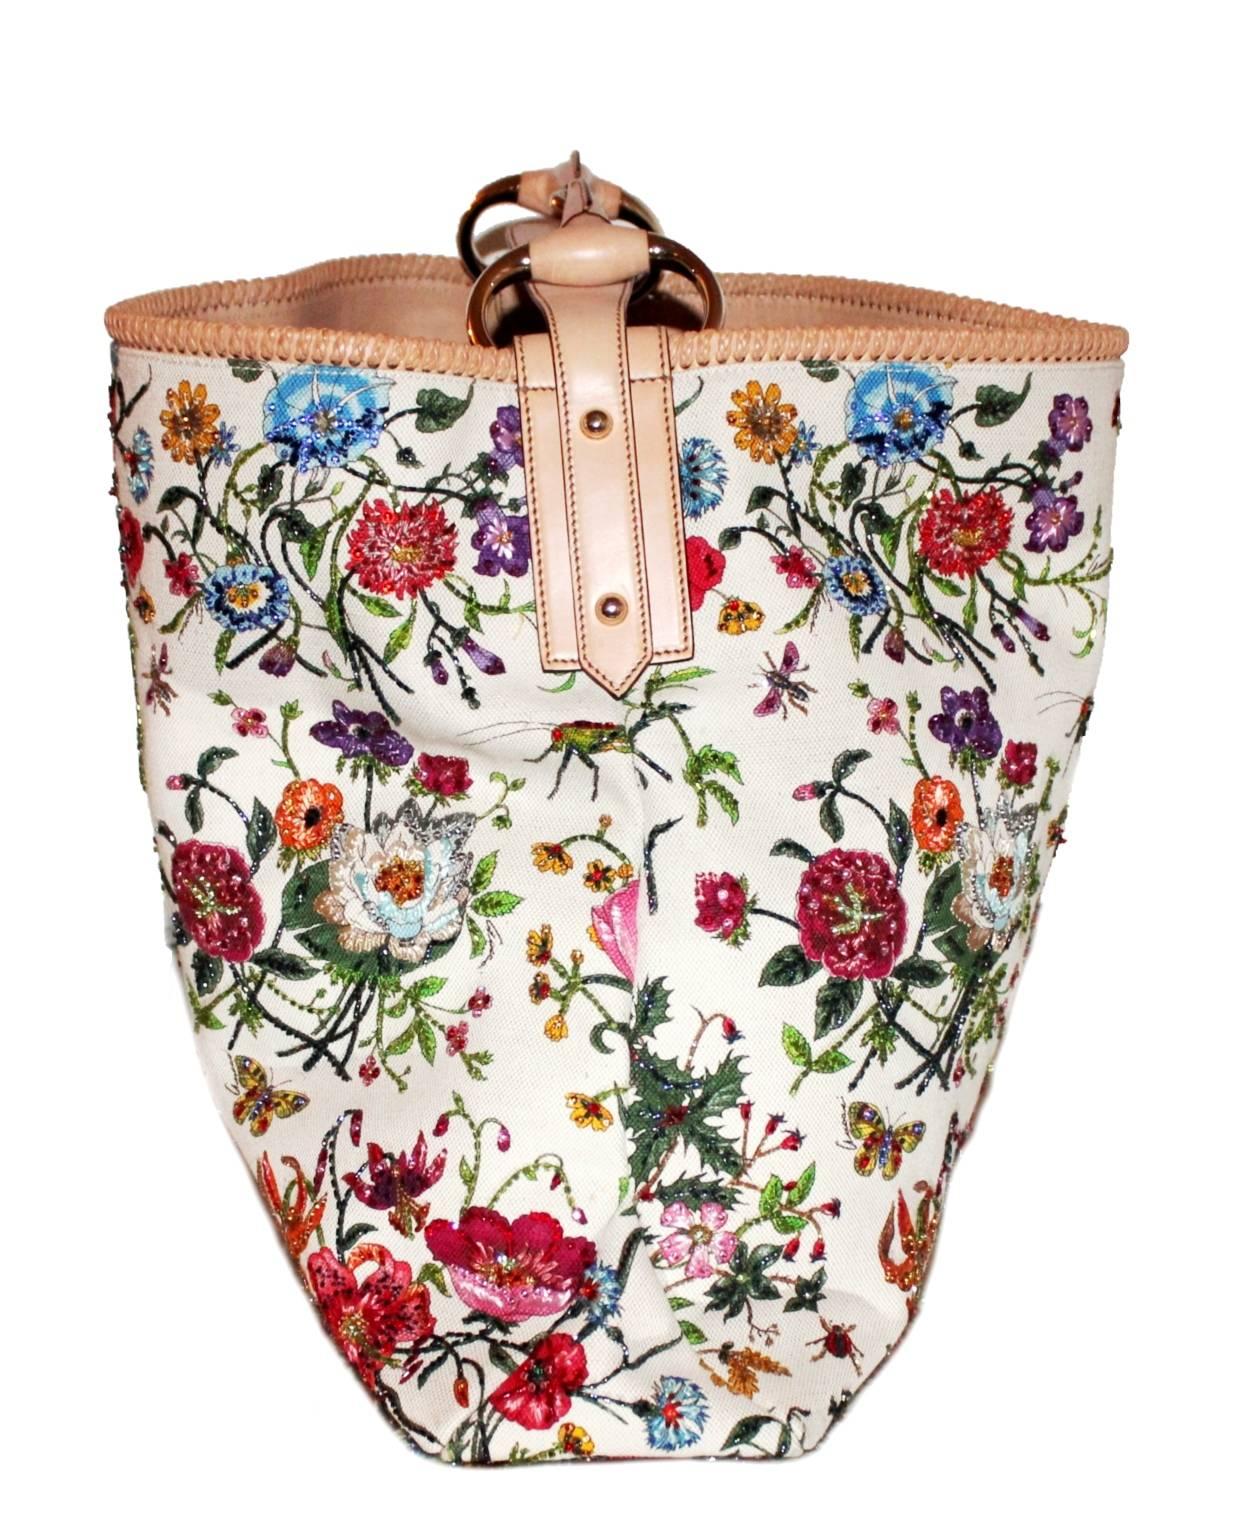 EXTREMELY RARE

GUCCI FLORAL FLORA BEADED HOBO BAG

XL SIZE

LIMITED EDITON - ONLY VERY FEW PIECES WERE PRODUCED OF THIS GORGEOUS BAG AND SOLD IN FLAGSHIP STORES TO A SELECTED CLIENTELE

DETAILS: 
A GUCCI signature piece that will last you